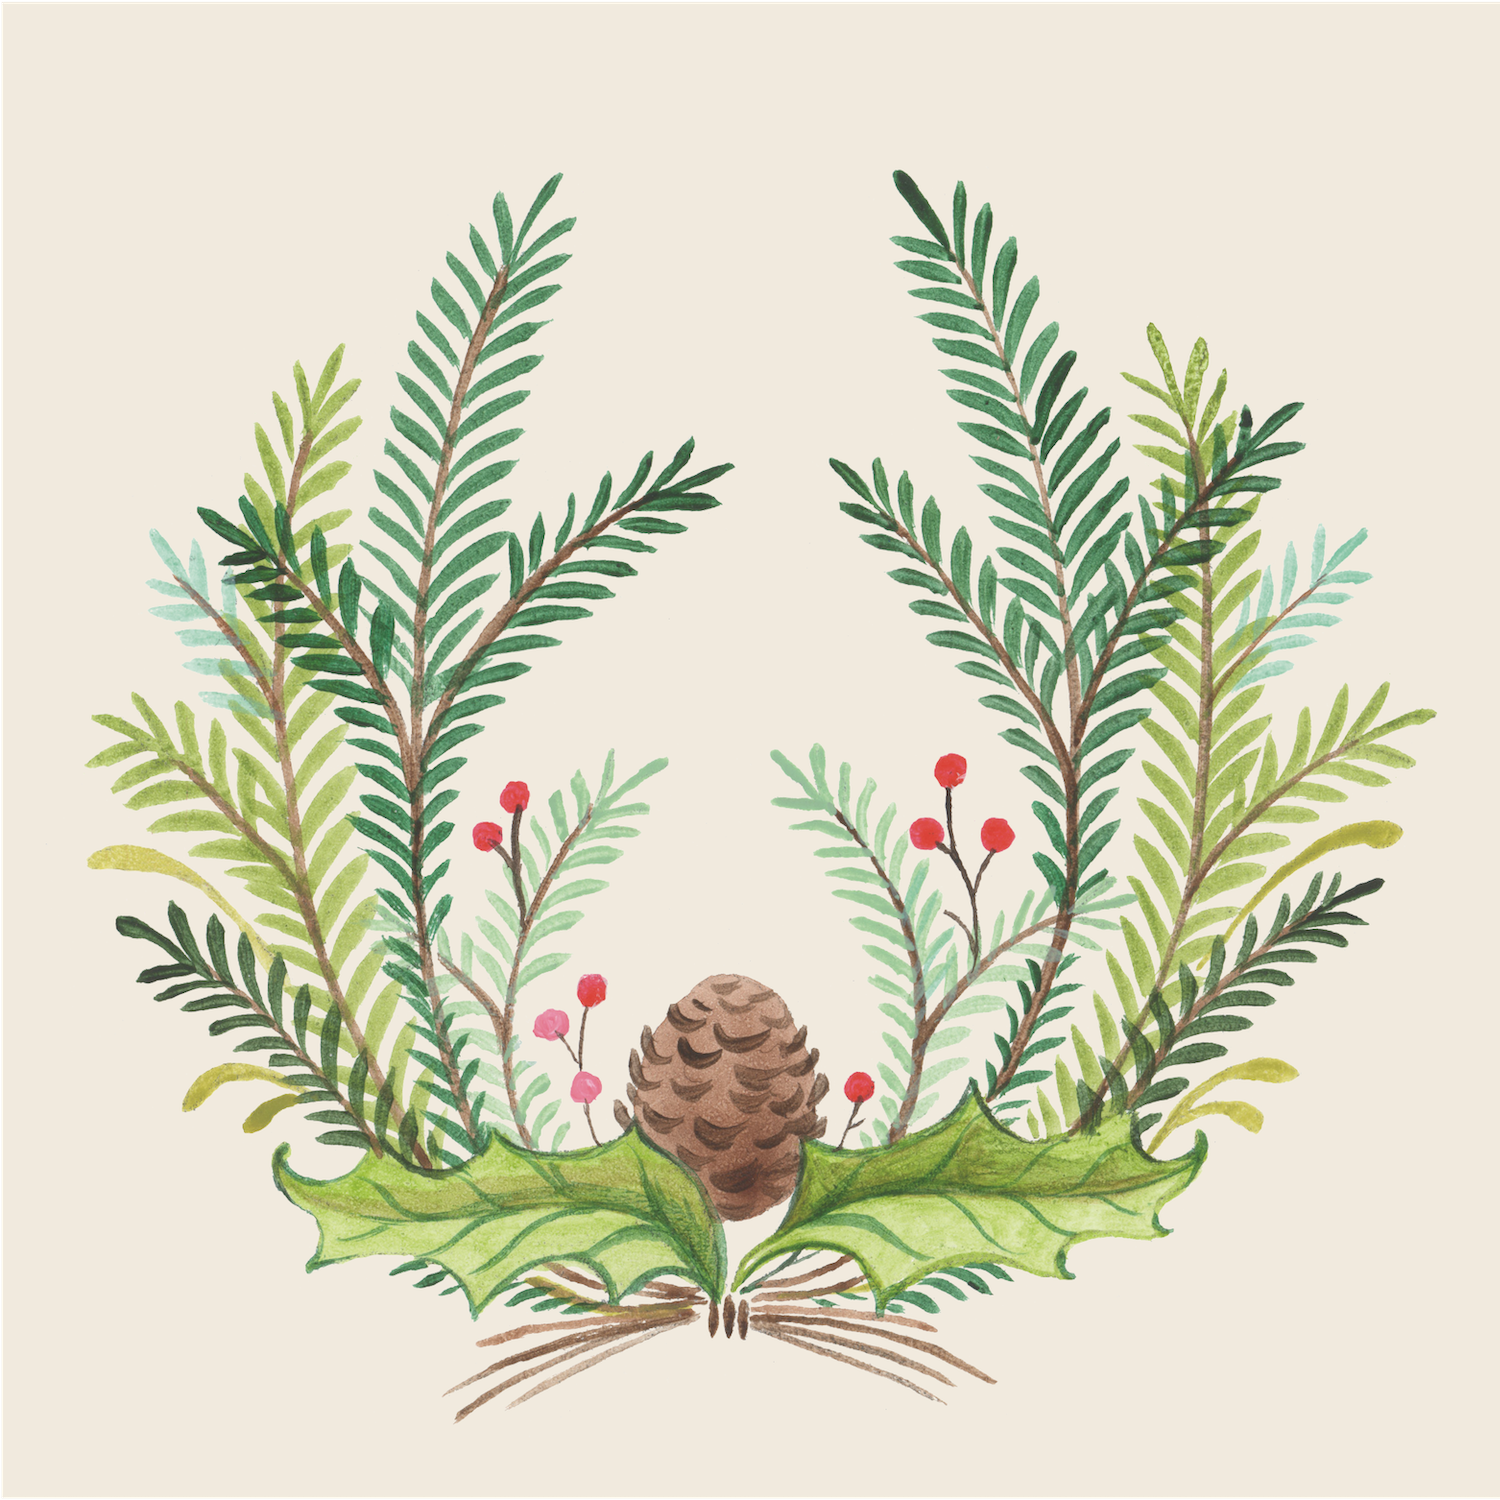 A square, cream cocktail napkin featuring a symmetrical illustrated wreath design with green winter foliage, red holly berries and a brown pinecone.